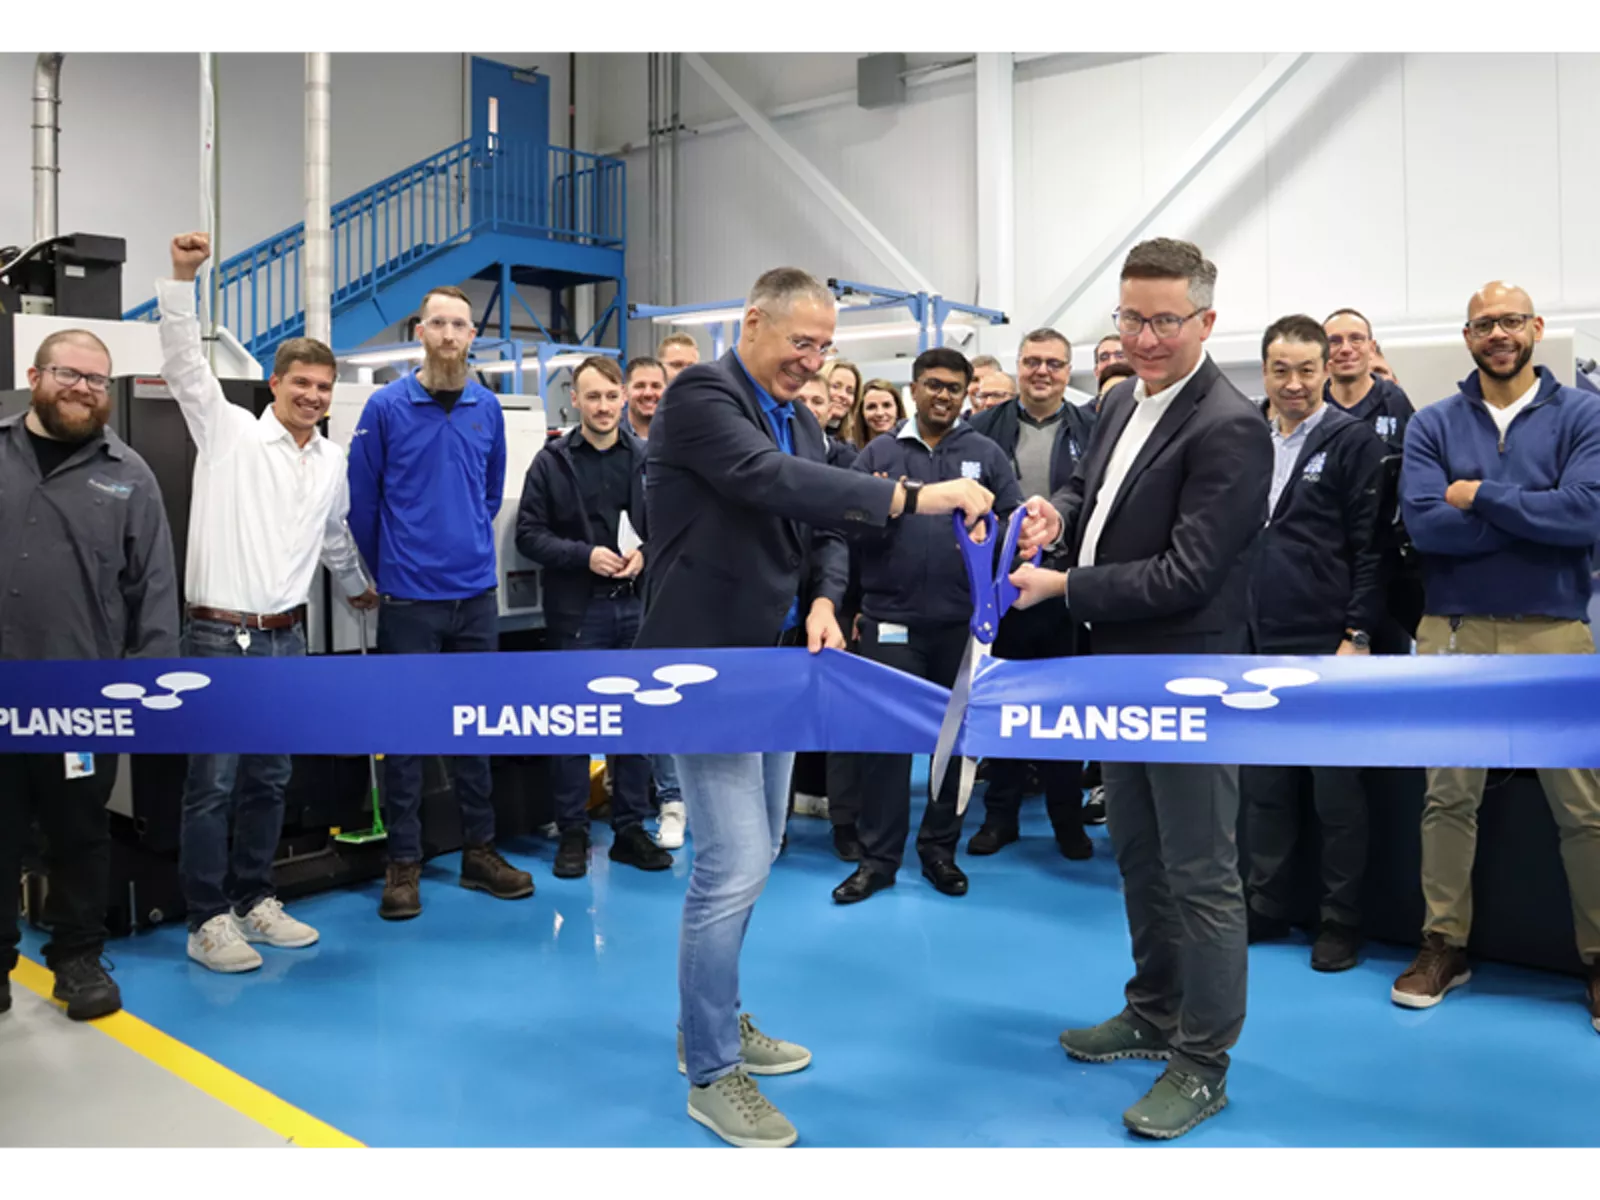 Opening of the new training center at Plansee USA